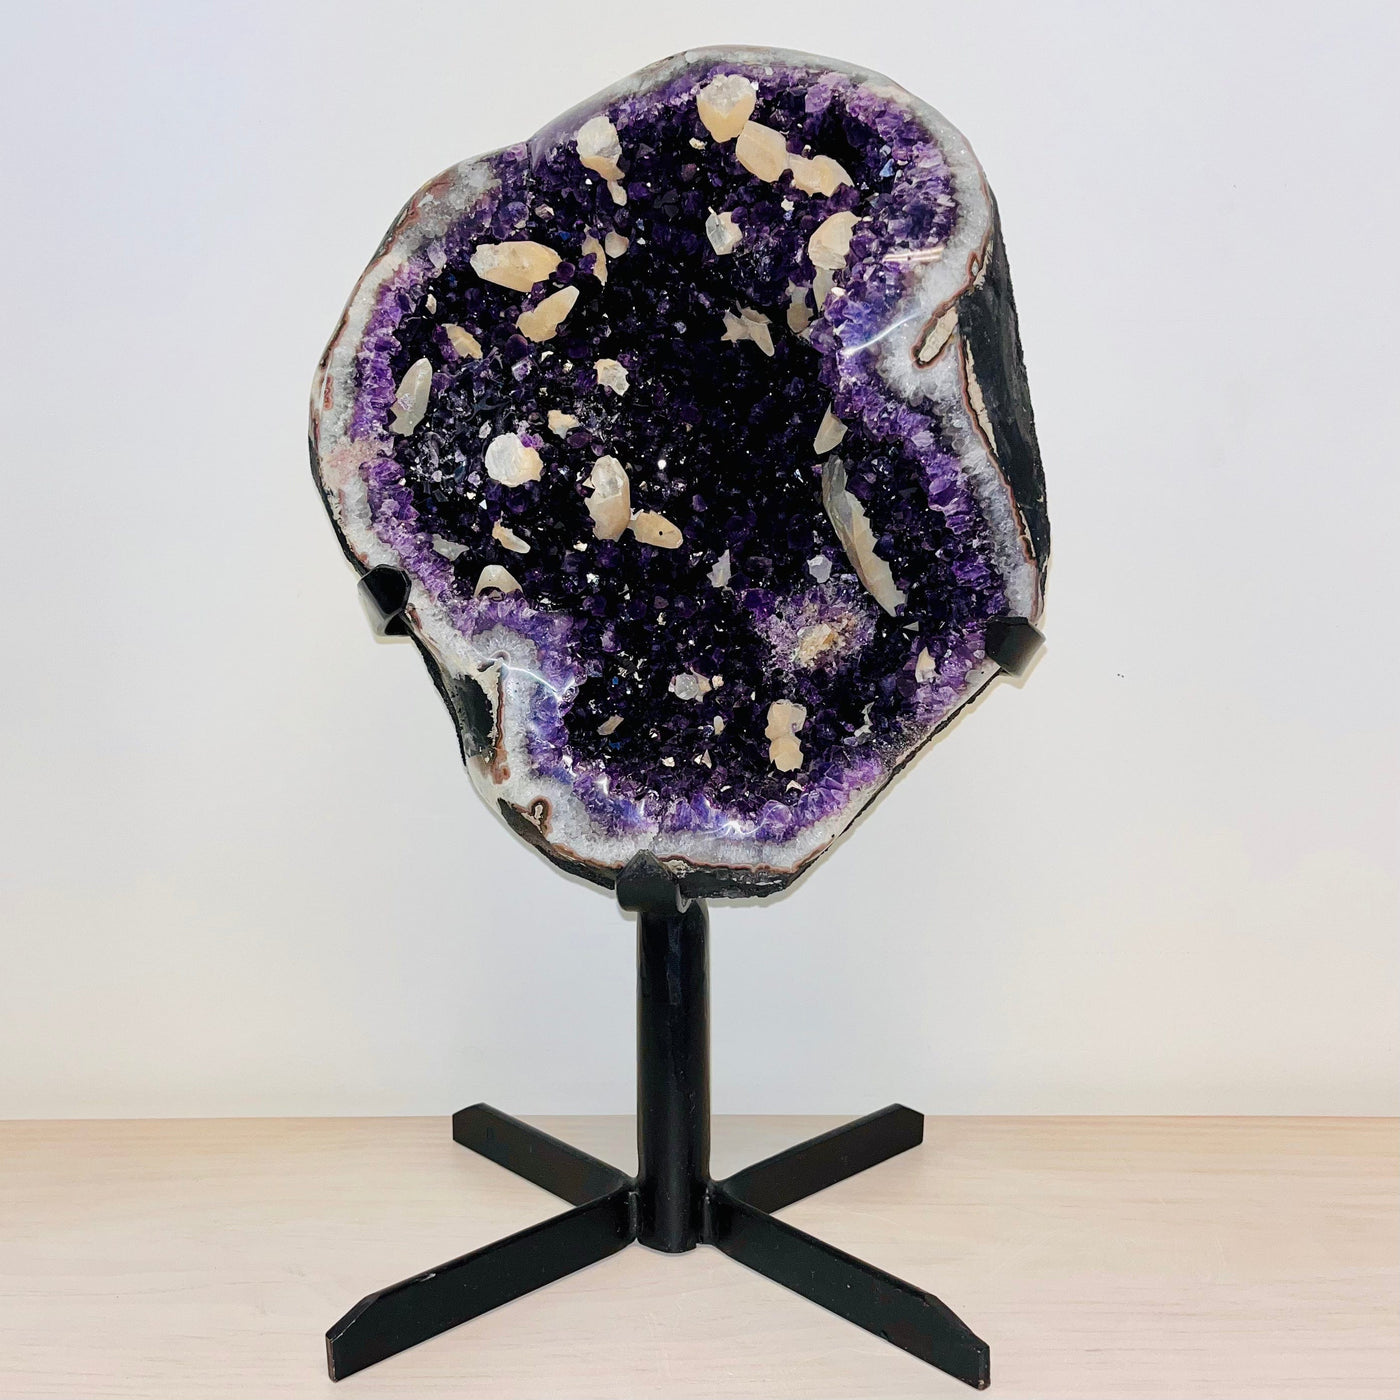 Frontal view of Large Dark Purple Amethyst and Calcite Geode on Metal Stand.